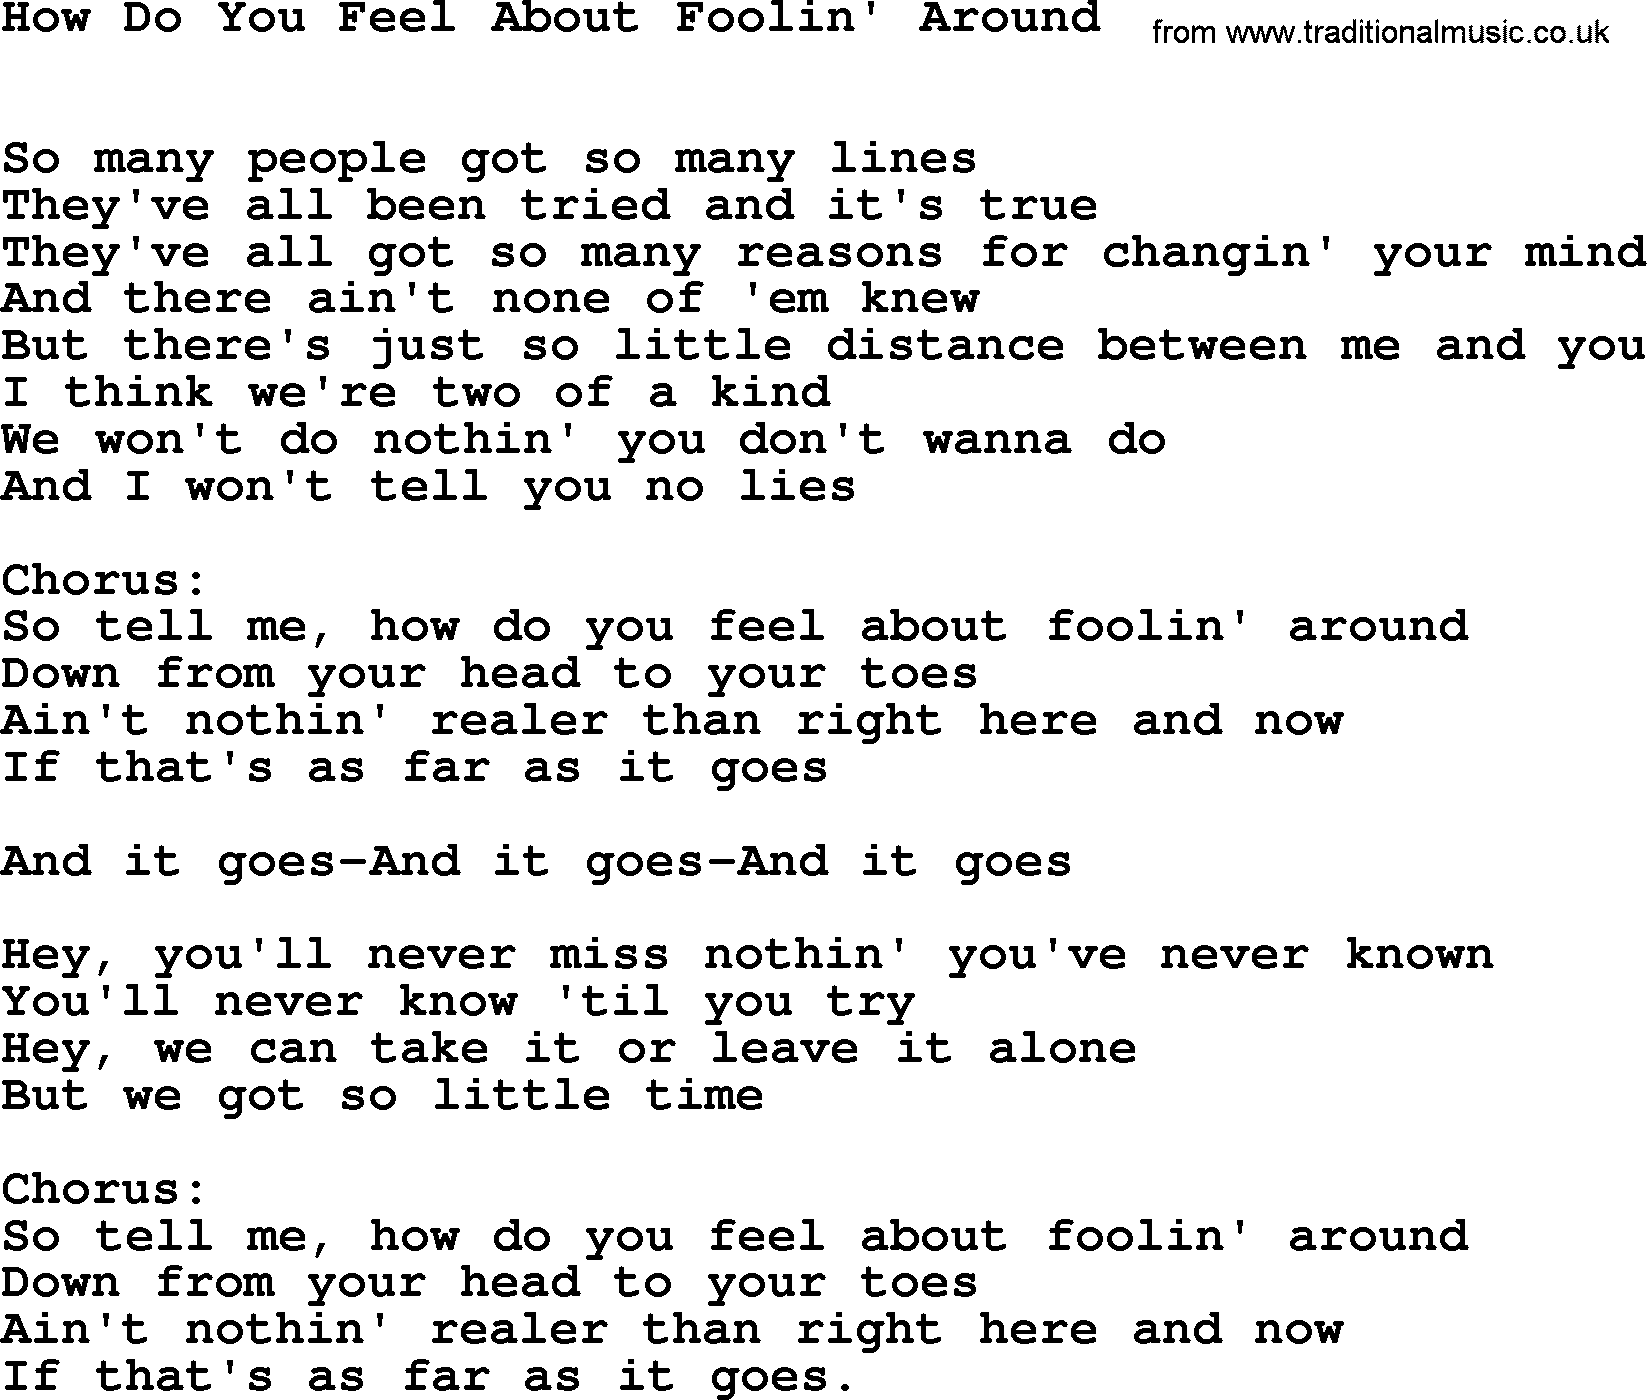 Willie Nelson song: How Do You Feel About Foolin' Around lyrics